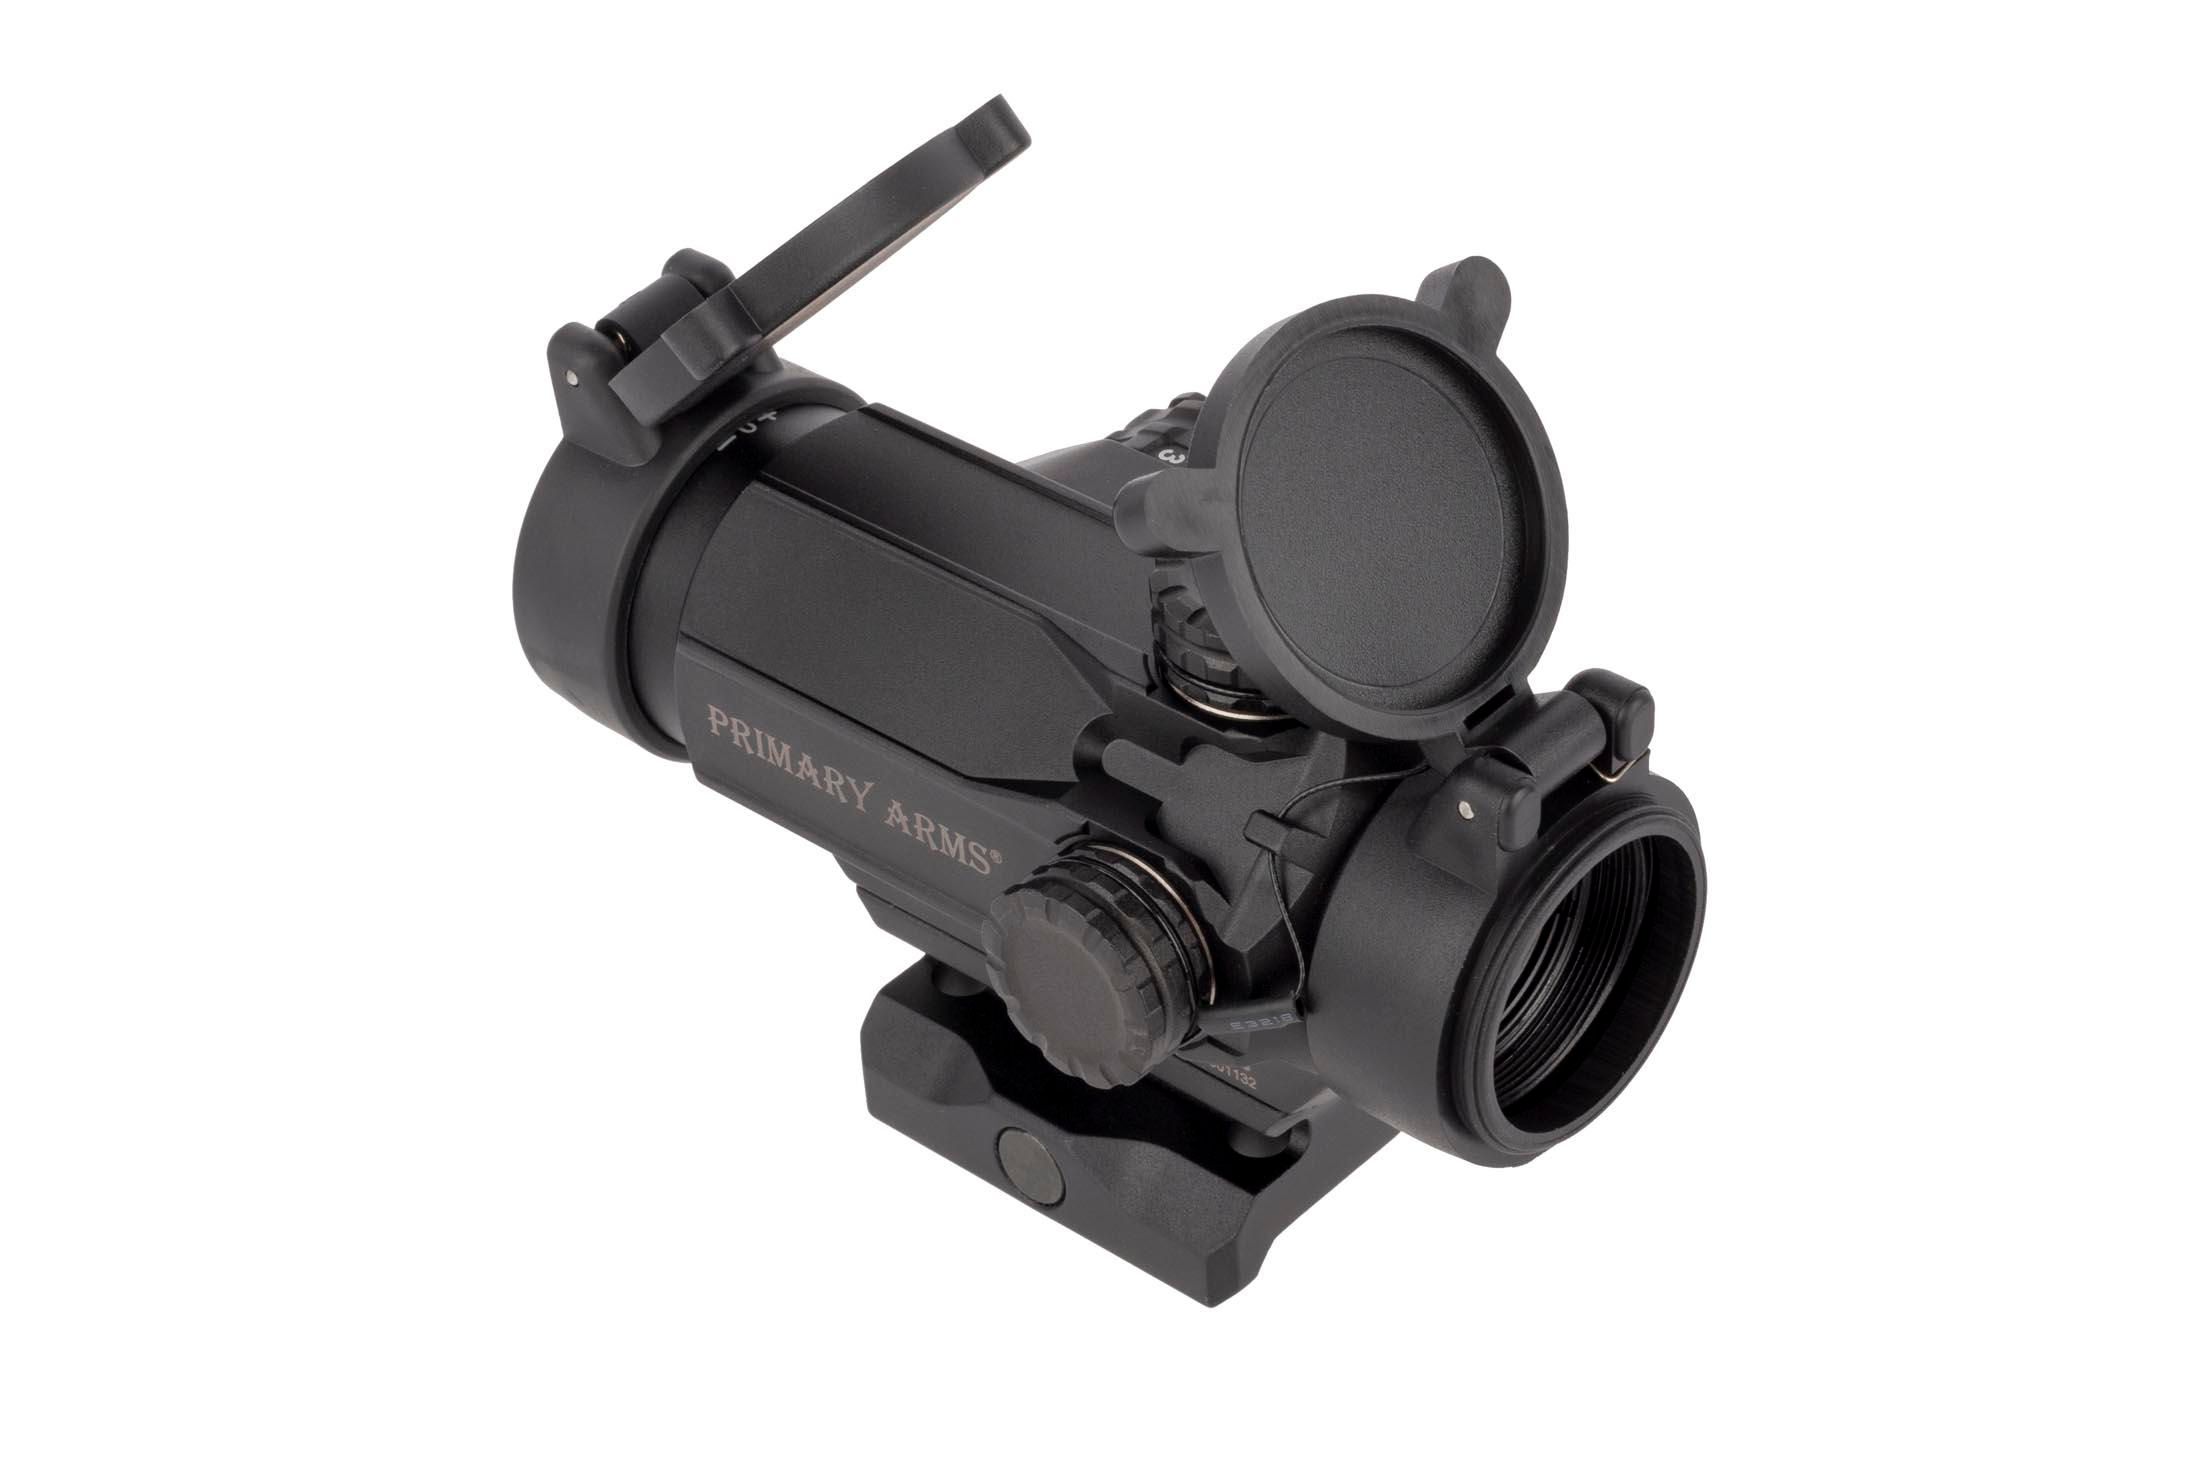 Primary Arms SLx Compact 1x20mm Prism Scope - ACSS Cyclops Reticle